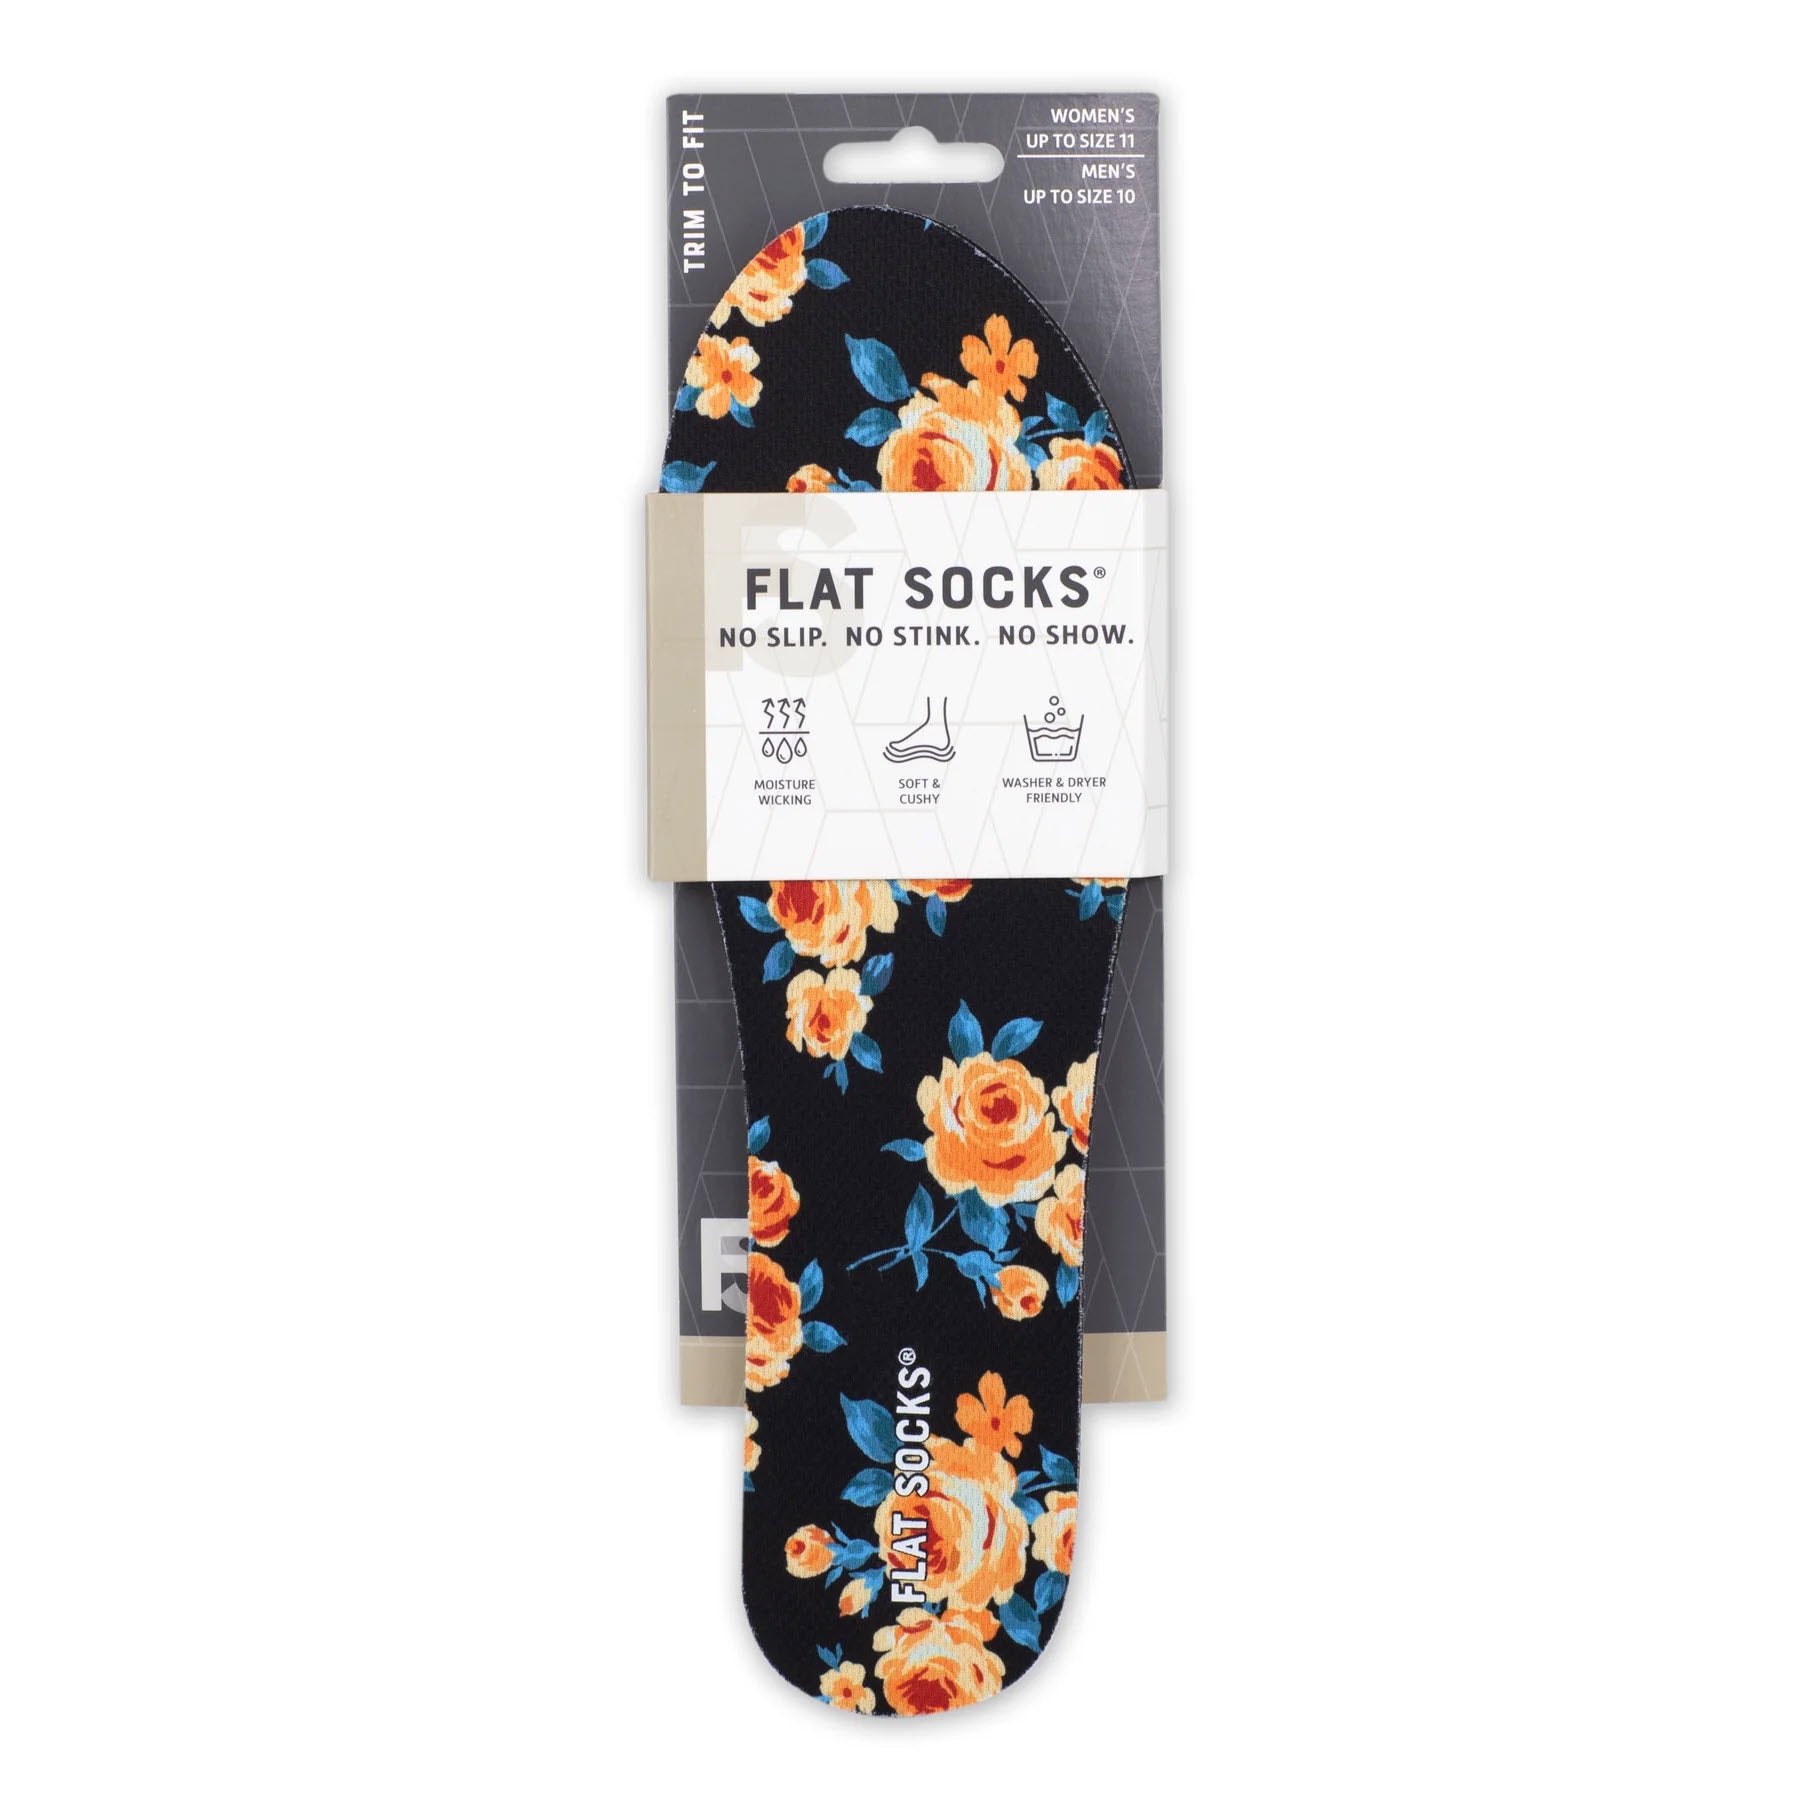 A package of FLAT SOCKS PEACHY ROSE FLORAL - WOMENS featuring peach roses on a navy background, labeled "no slip no stink no show," hung on a white background.